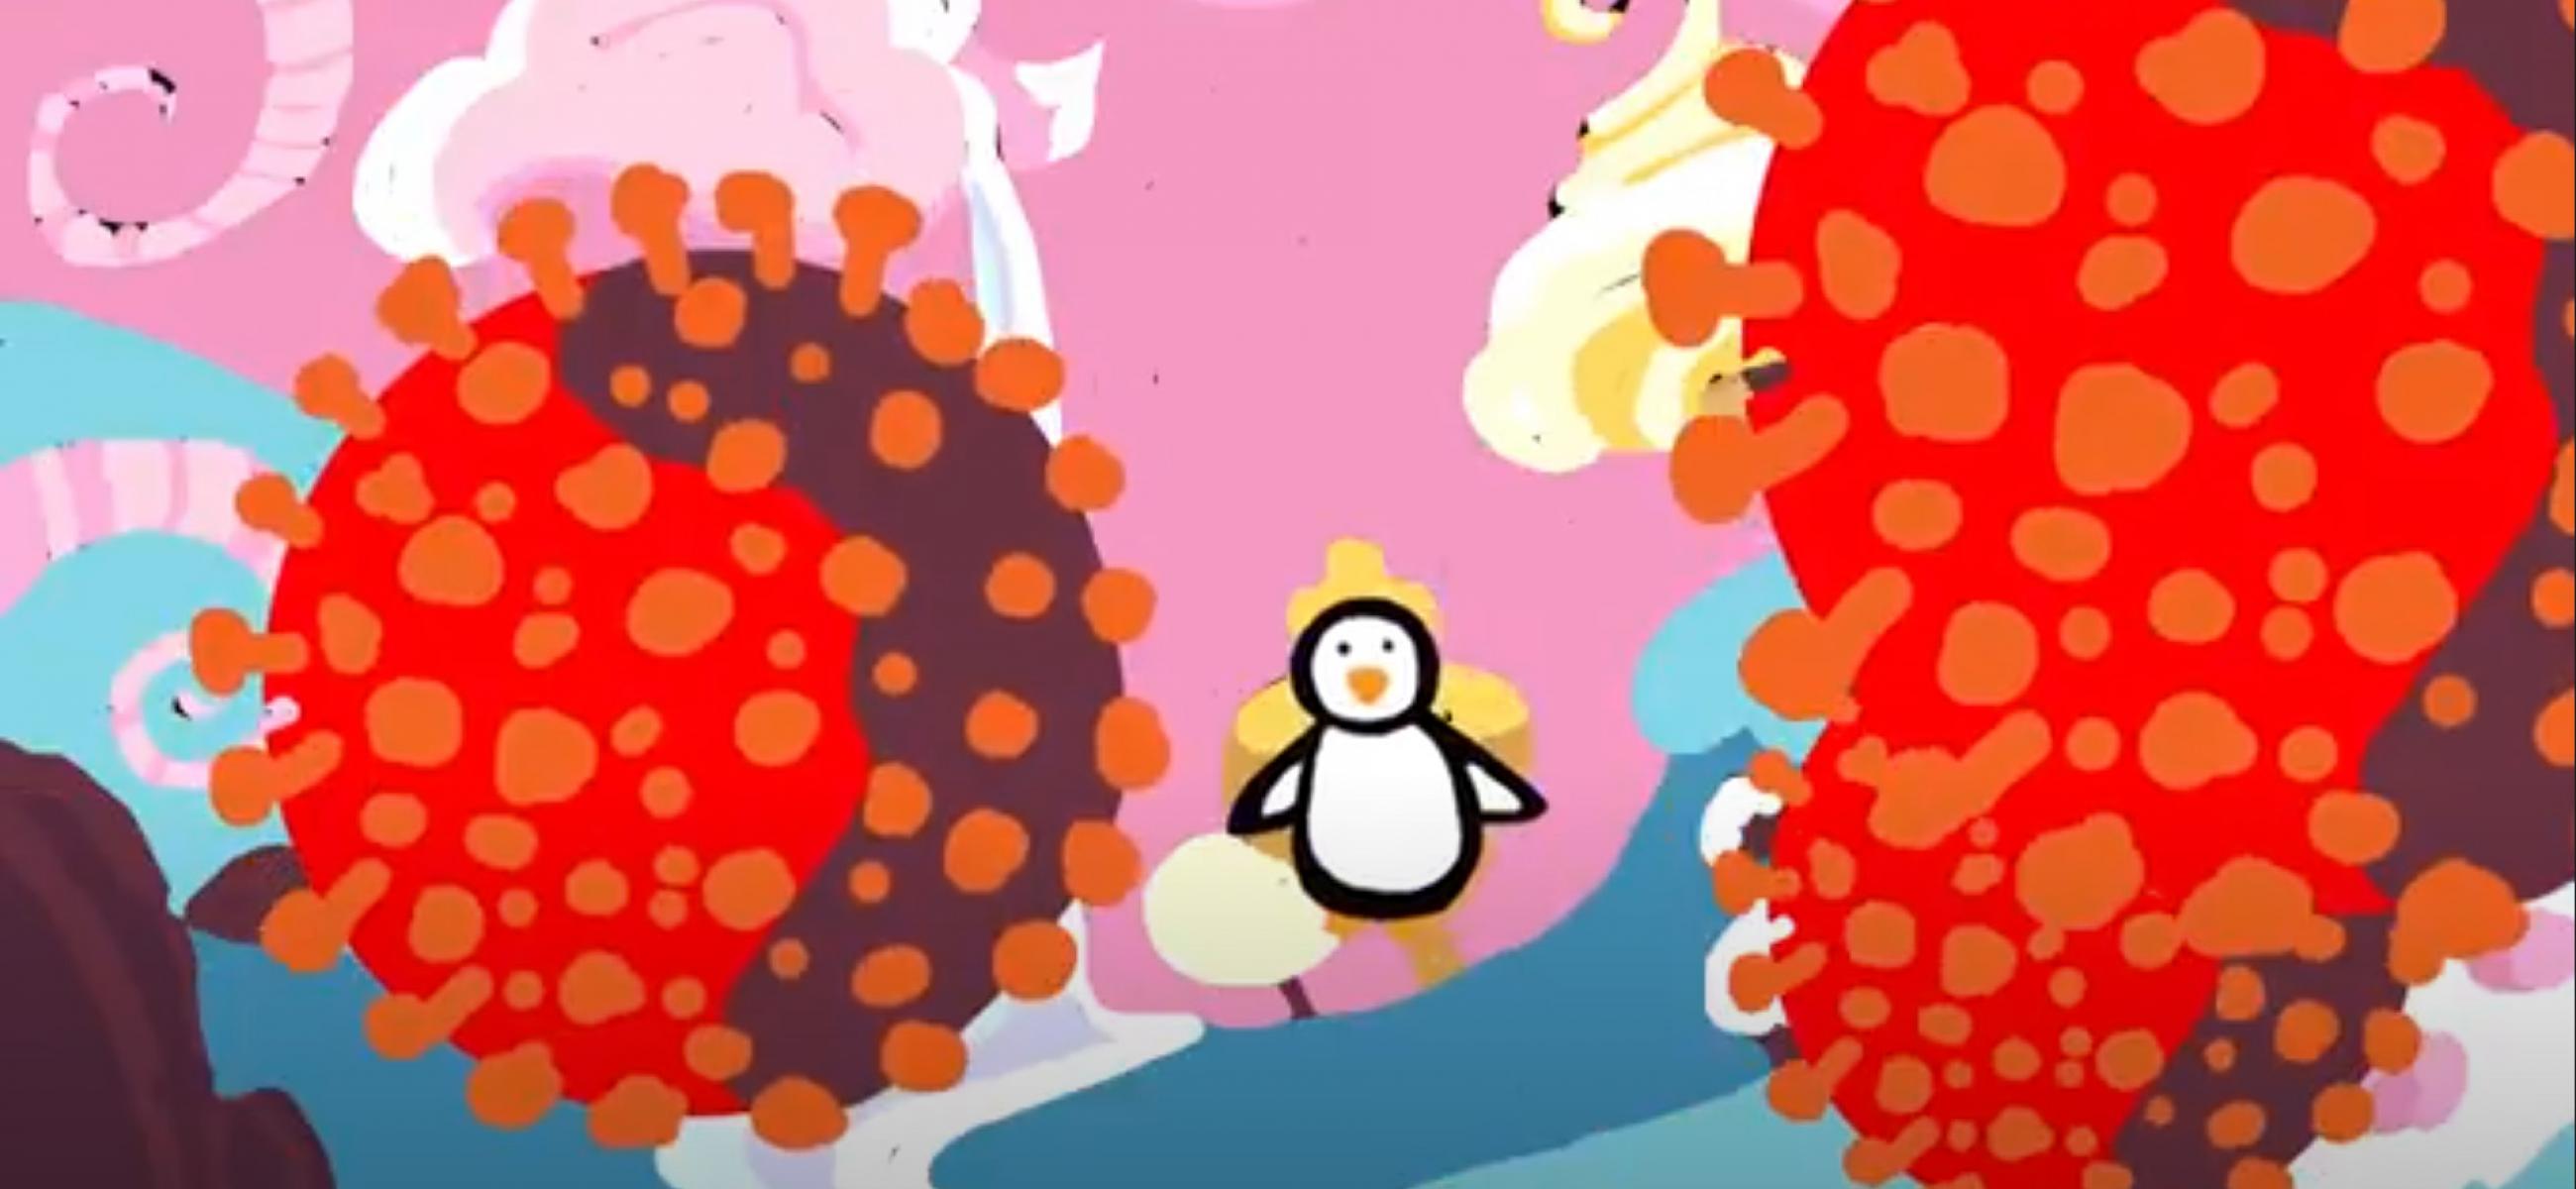 small birdy figure in a cheerful yet threatening landscape of brightly color spheroids reminiscent of viruses